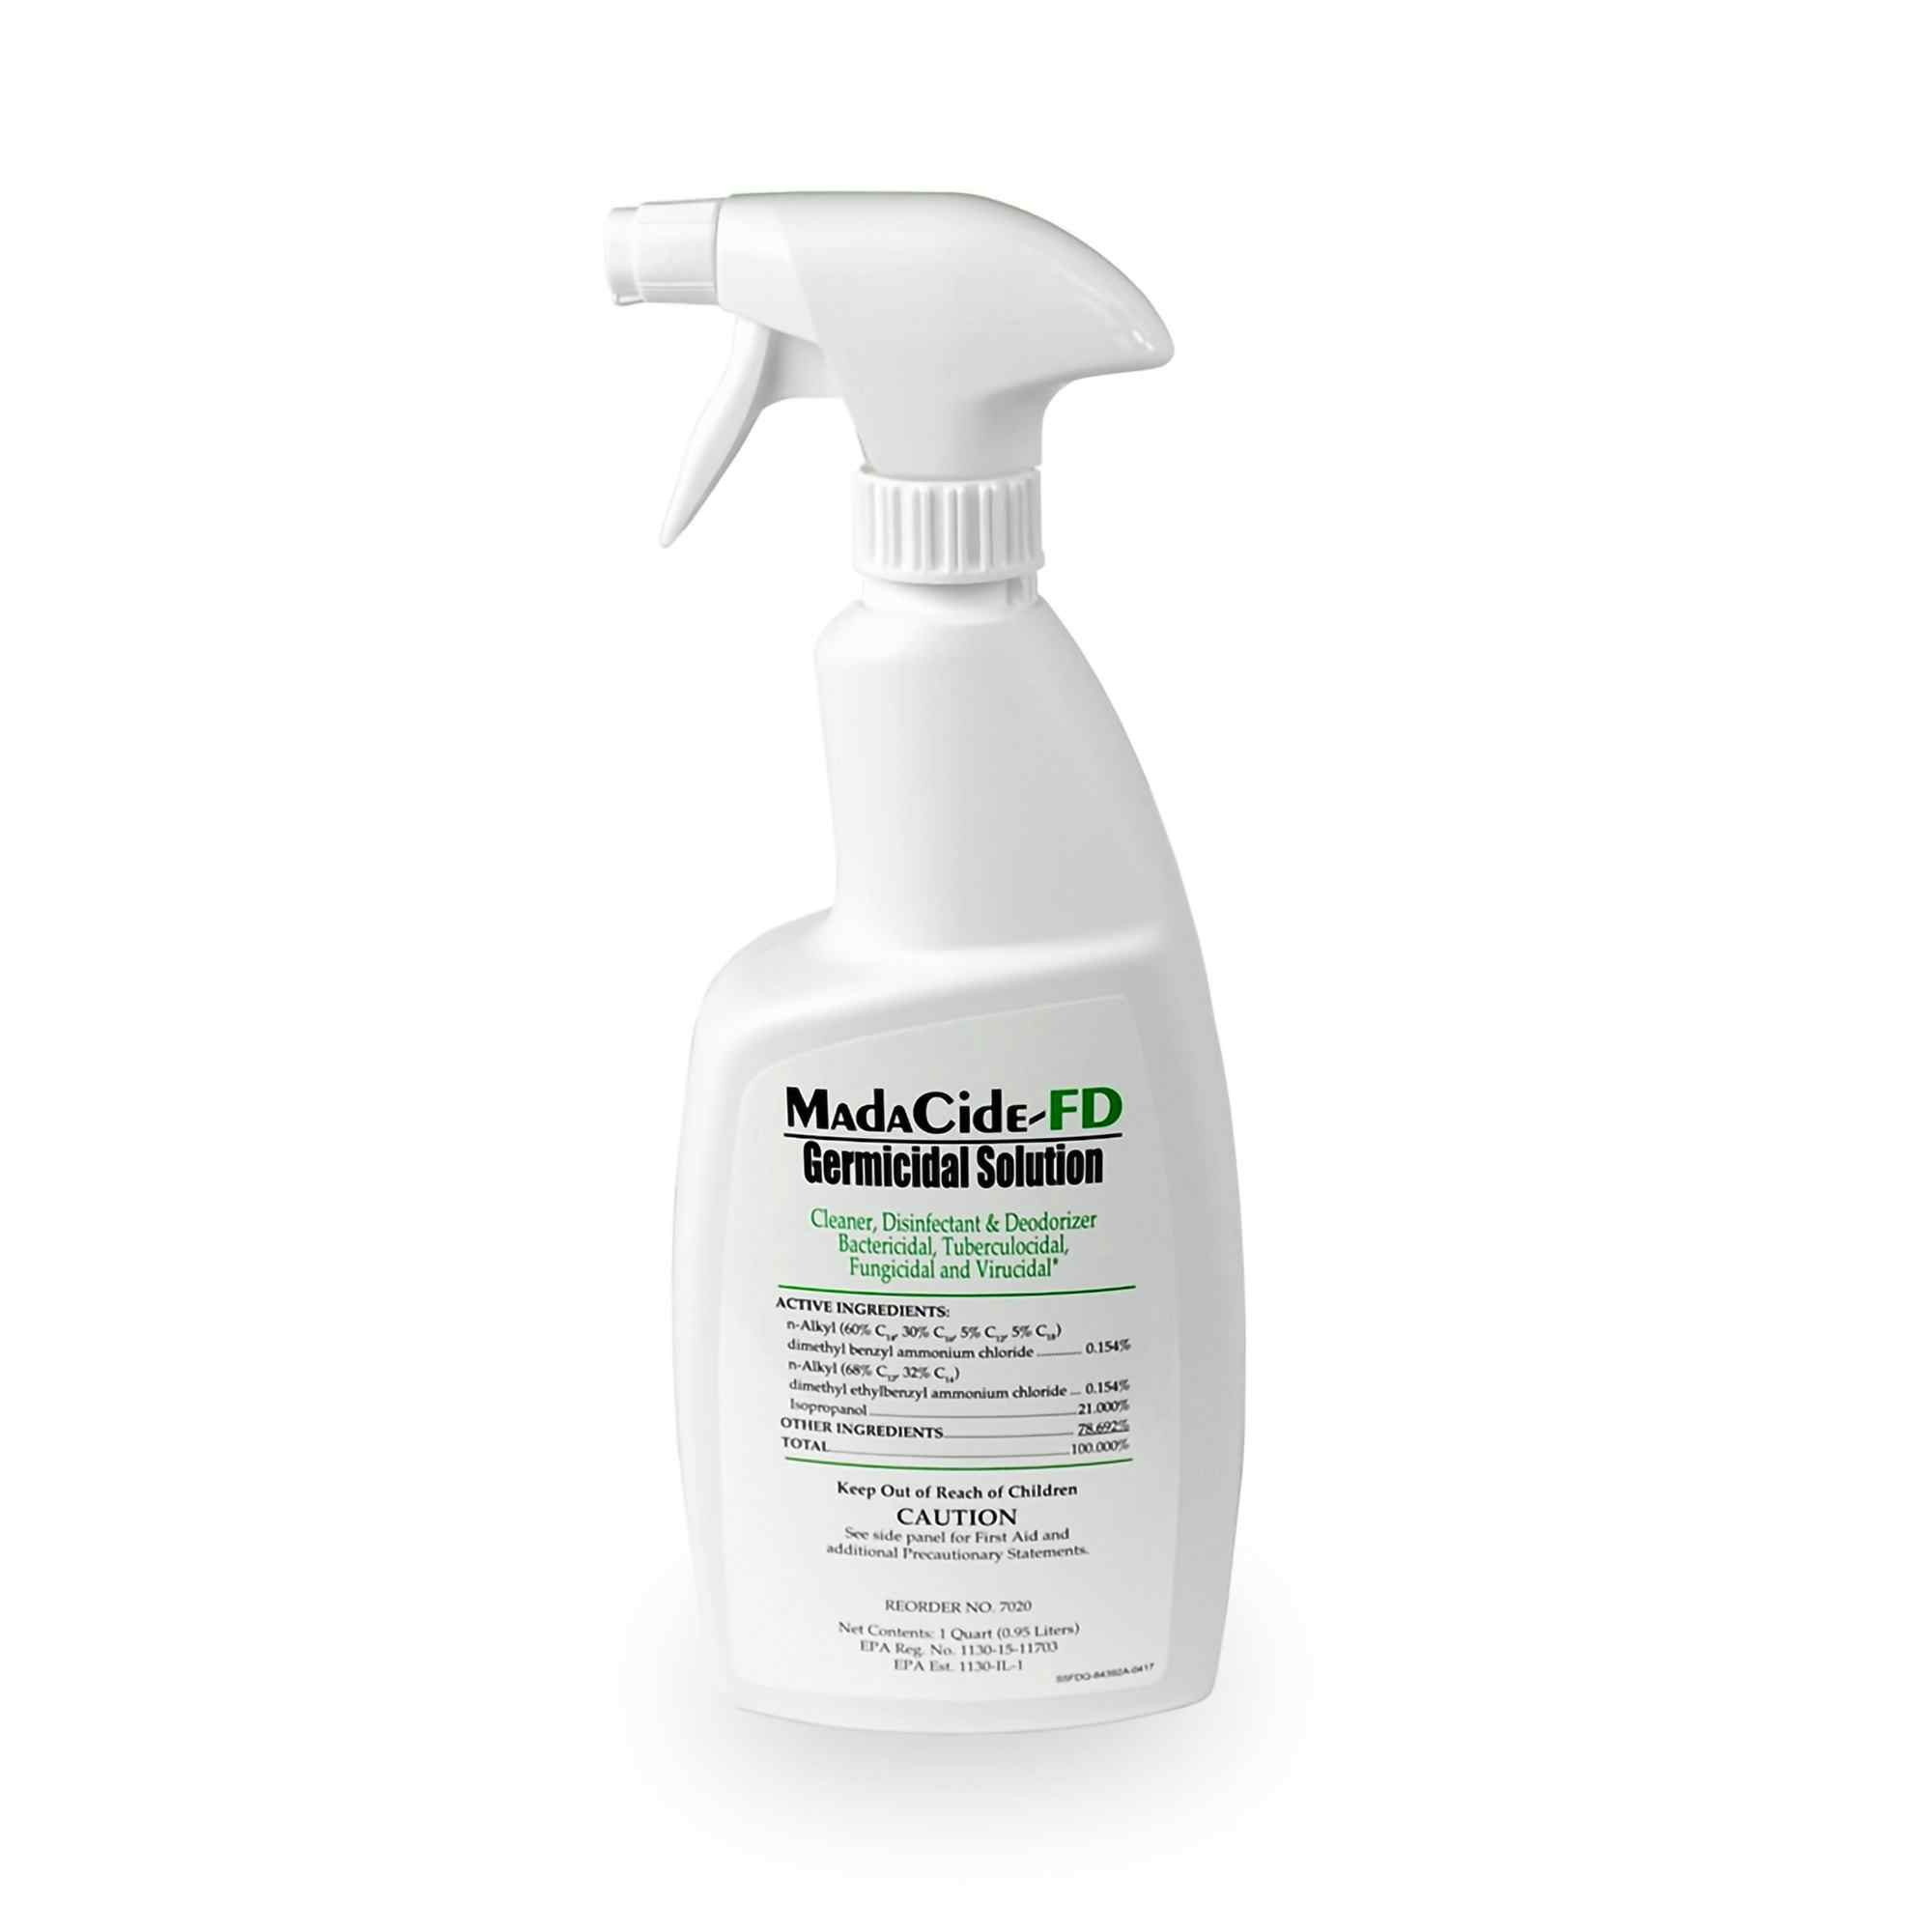 MadaCide-FD Germicidal Solution Cleaner, Disinfectant & Deodorizer, 32 oz.